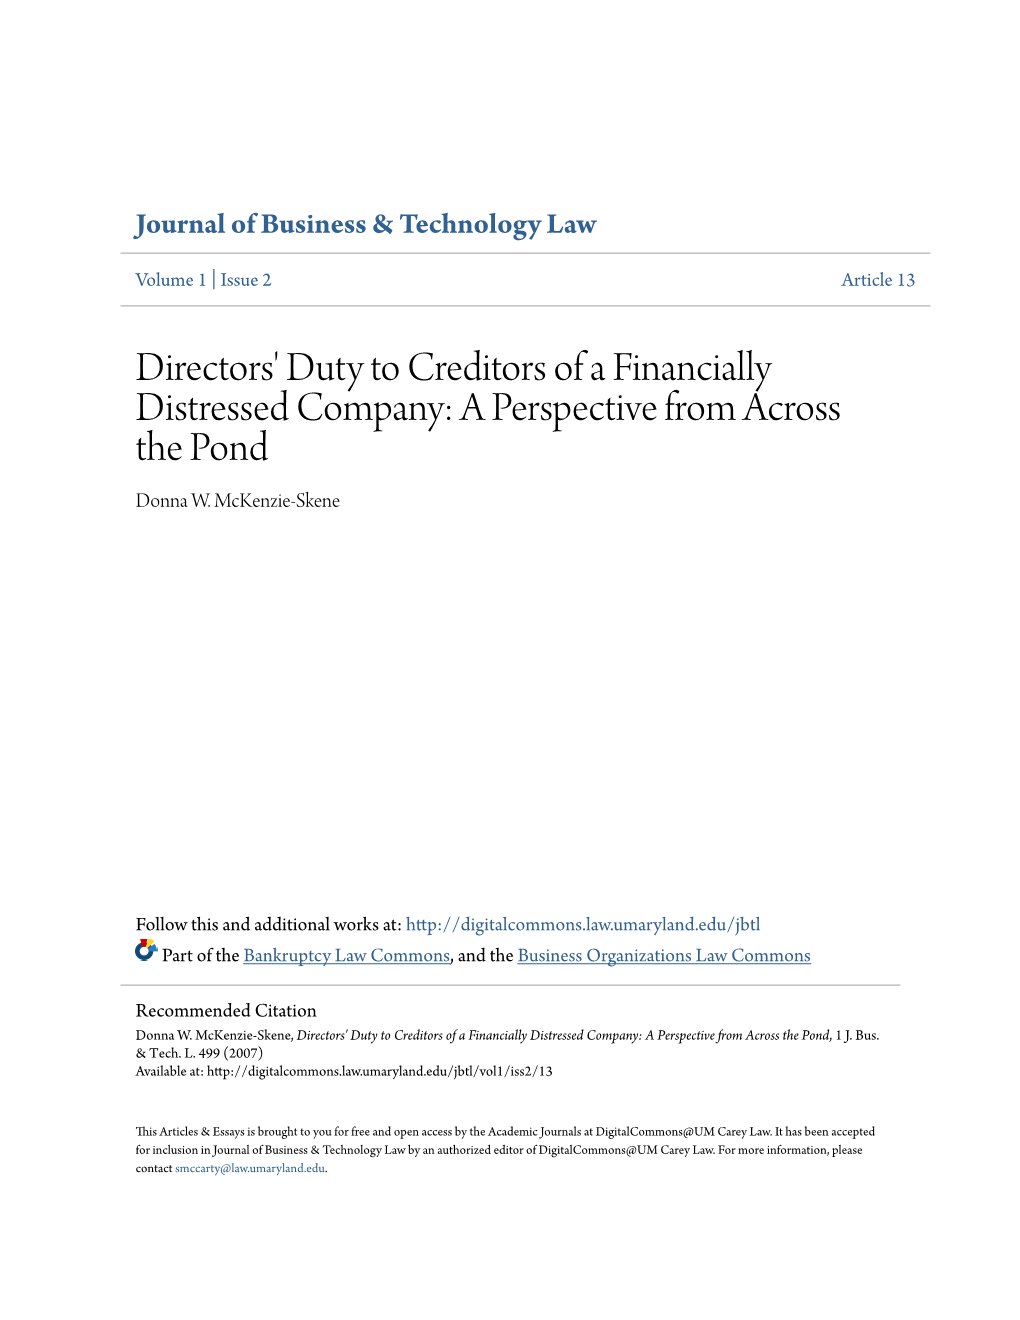 Directors' Duty to Creditors of a Financially Distressed Company: a Perspective from Across the Pond Donna W